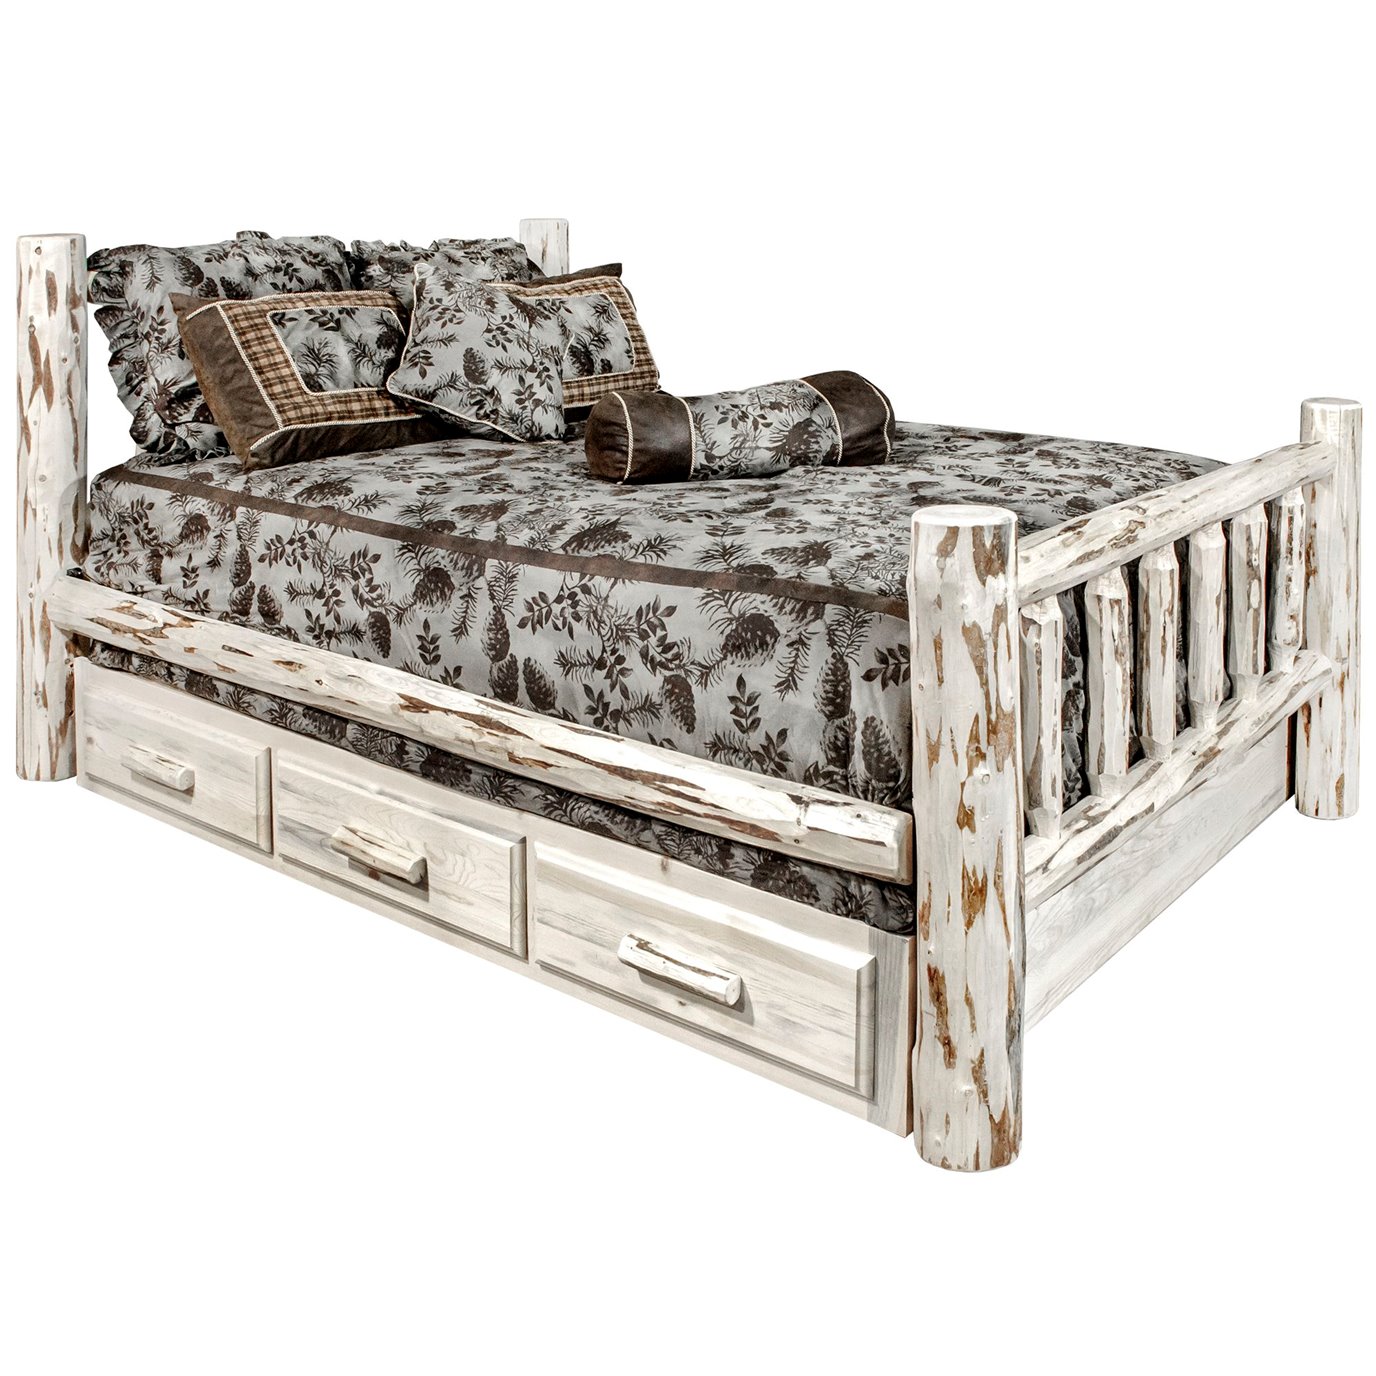 Montana Queen Bed w/ Storage - Clear Lacquer Finish